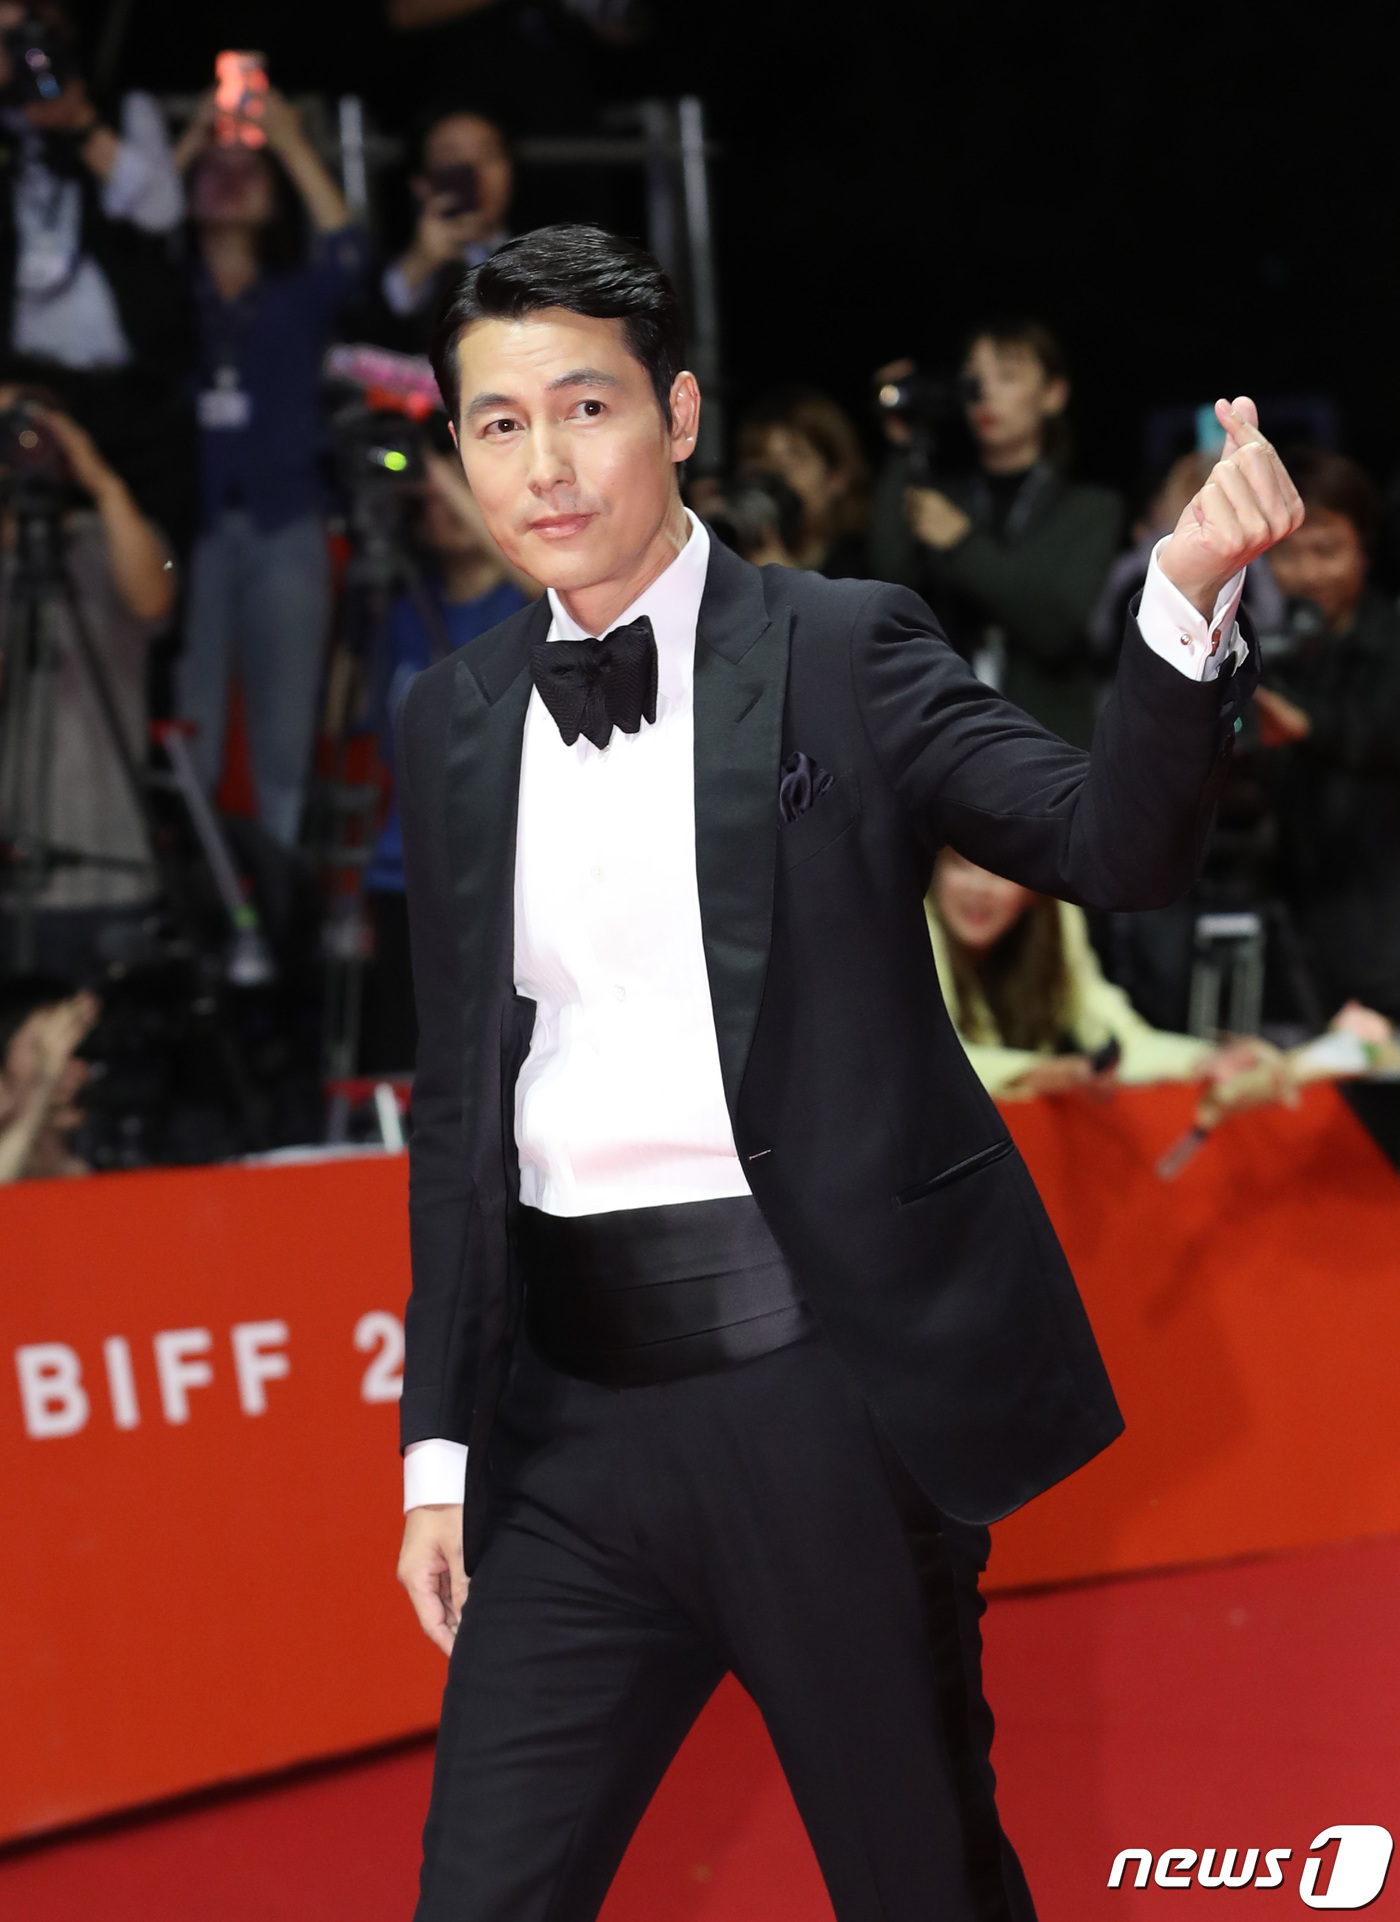 Busan=) = Actor Jung Woo-sung offered consolation to citizens affected by the 18th Typhoon Meatak.Jung Woo-sung took the stage with Lee Ha-nui at the opening ceremony of the 24th Busan International Film Festival held at the Udong Film Hall in Haeundae-gu, Busan on the afternoon of the 3rd.I welcome you to the 24th Busan International Film Festival, the best film festival in Asia, he said. I am saddened by the damage caused by Typhoon.I will give deep condolences to the victims, he said.Meanwhile, the 24th Busan International Film Festival held the opening ceremony at 7 pm on the day of Actor Jung Woo-sung and Lee Ha-nui.This year, 299 films from 85 countries were invited. The opening film is The Way of Horse Thieves. Time. The closing film is To Yoon Hee. The festival will be held around Busan until the 12th.